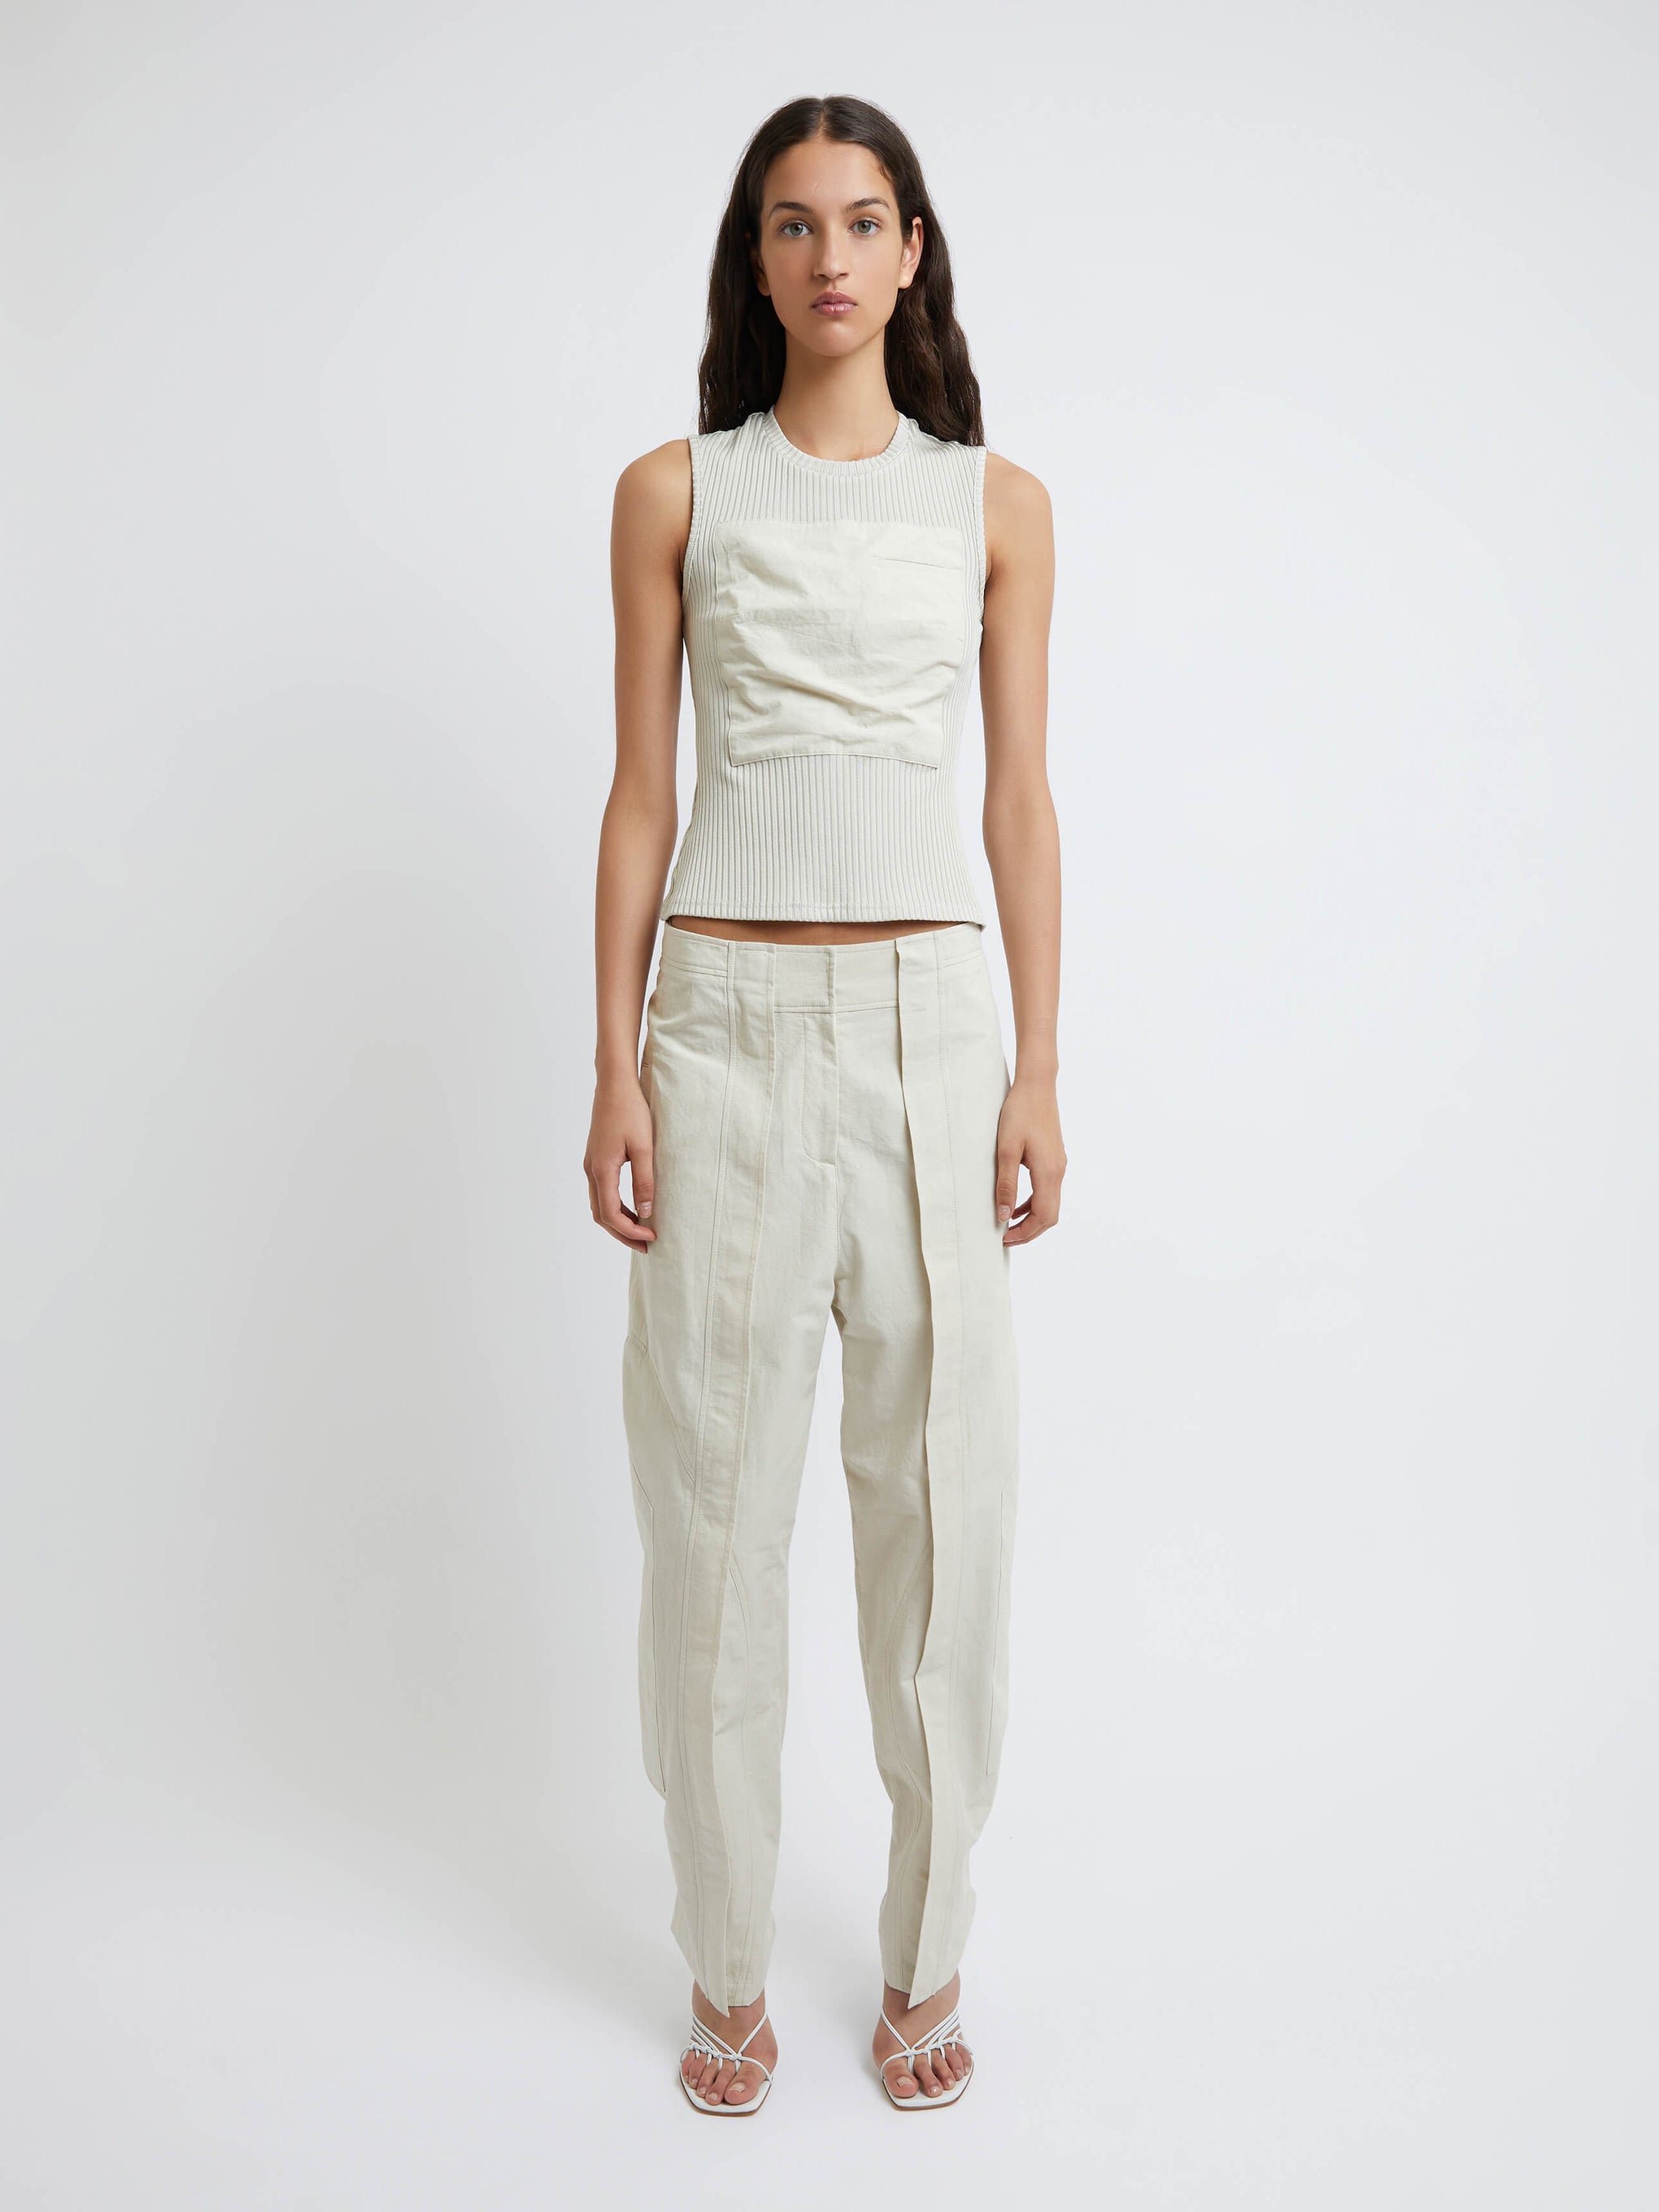 Christopher Esber Cocosolo Trouser in Putty available at TNT The New Trend Australia.